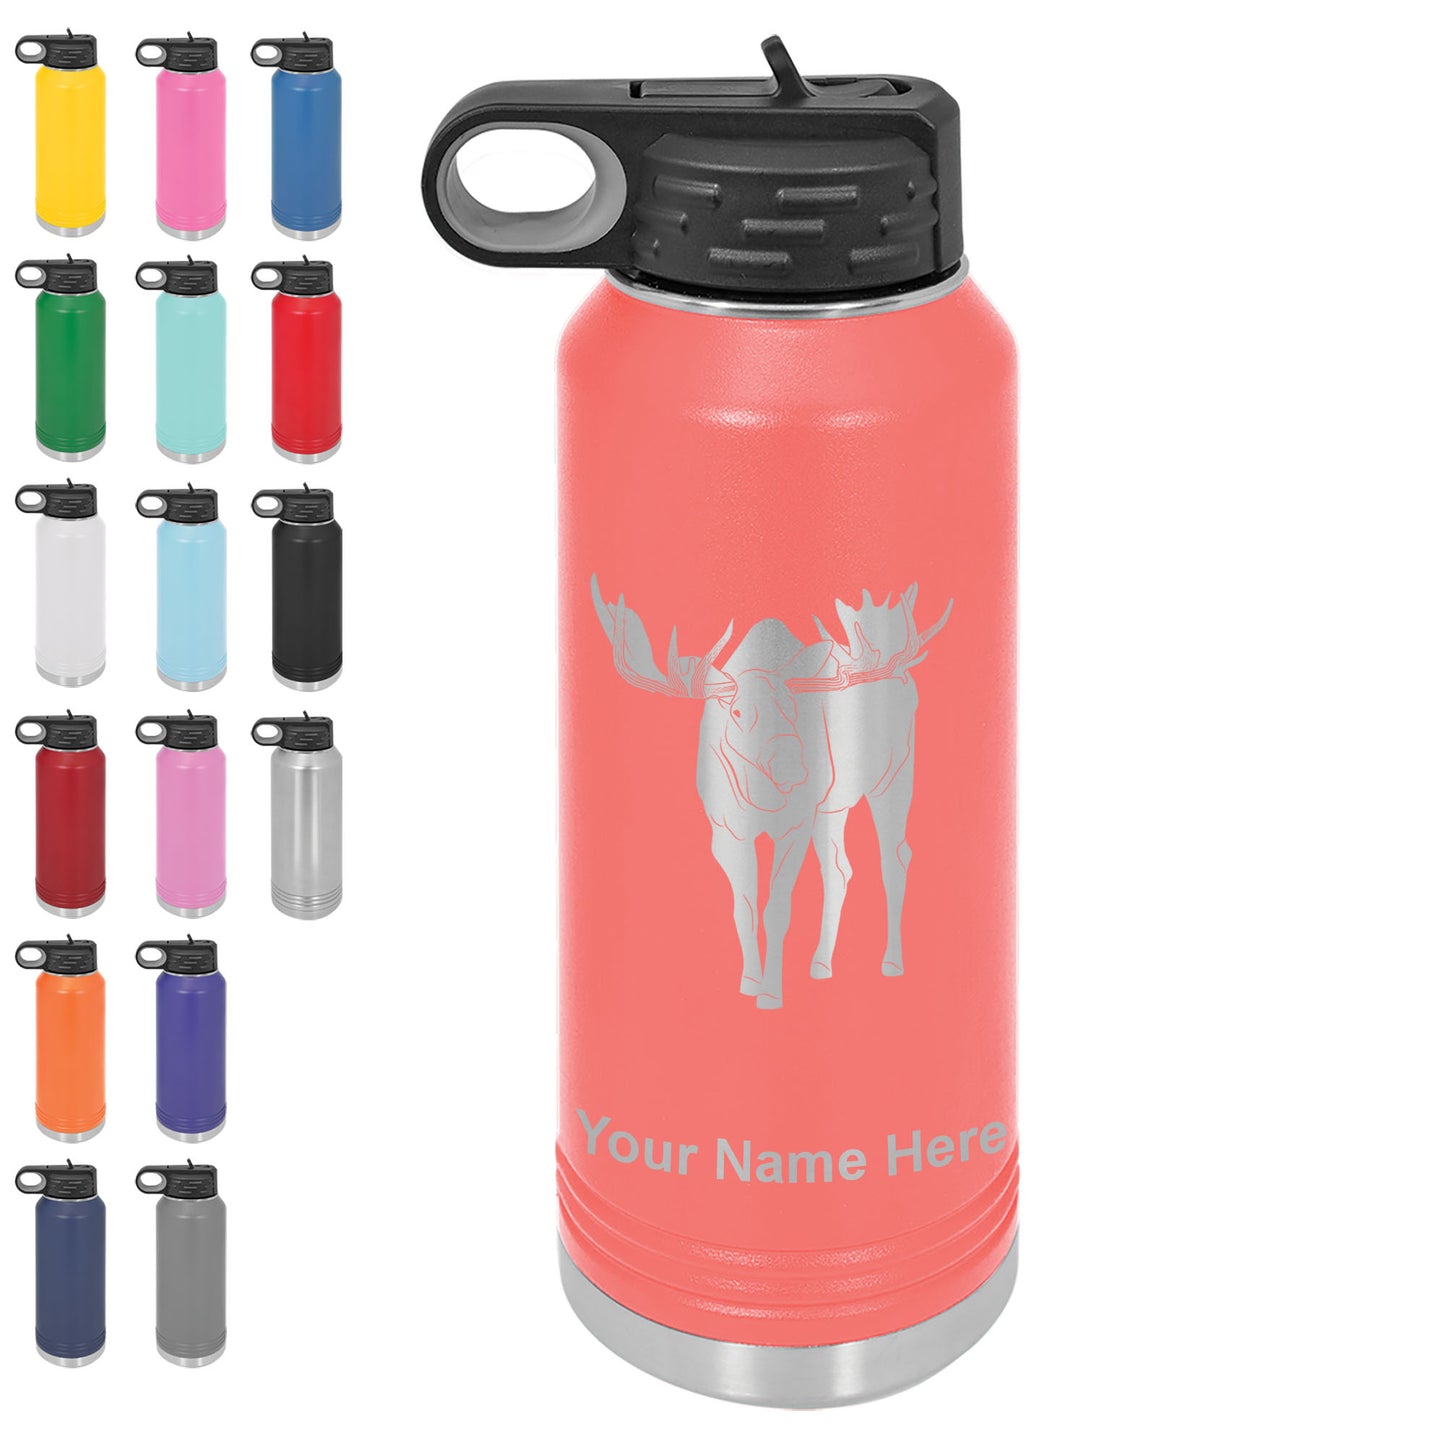 LaserGram 32oz Double Wall Flip Top Water Bottle with Straw, Moose, Personalized Engraving Included